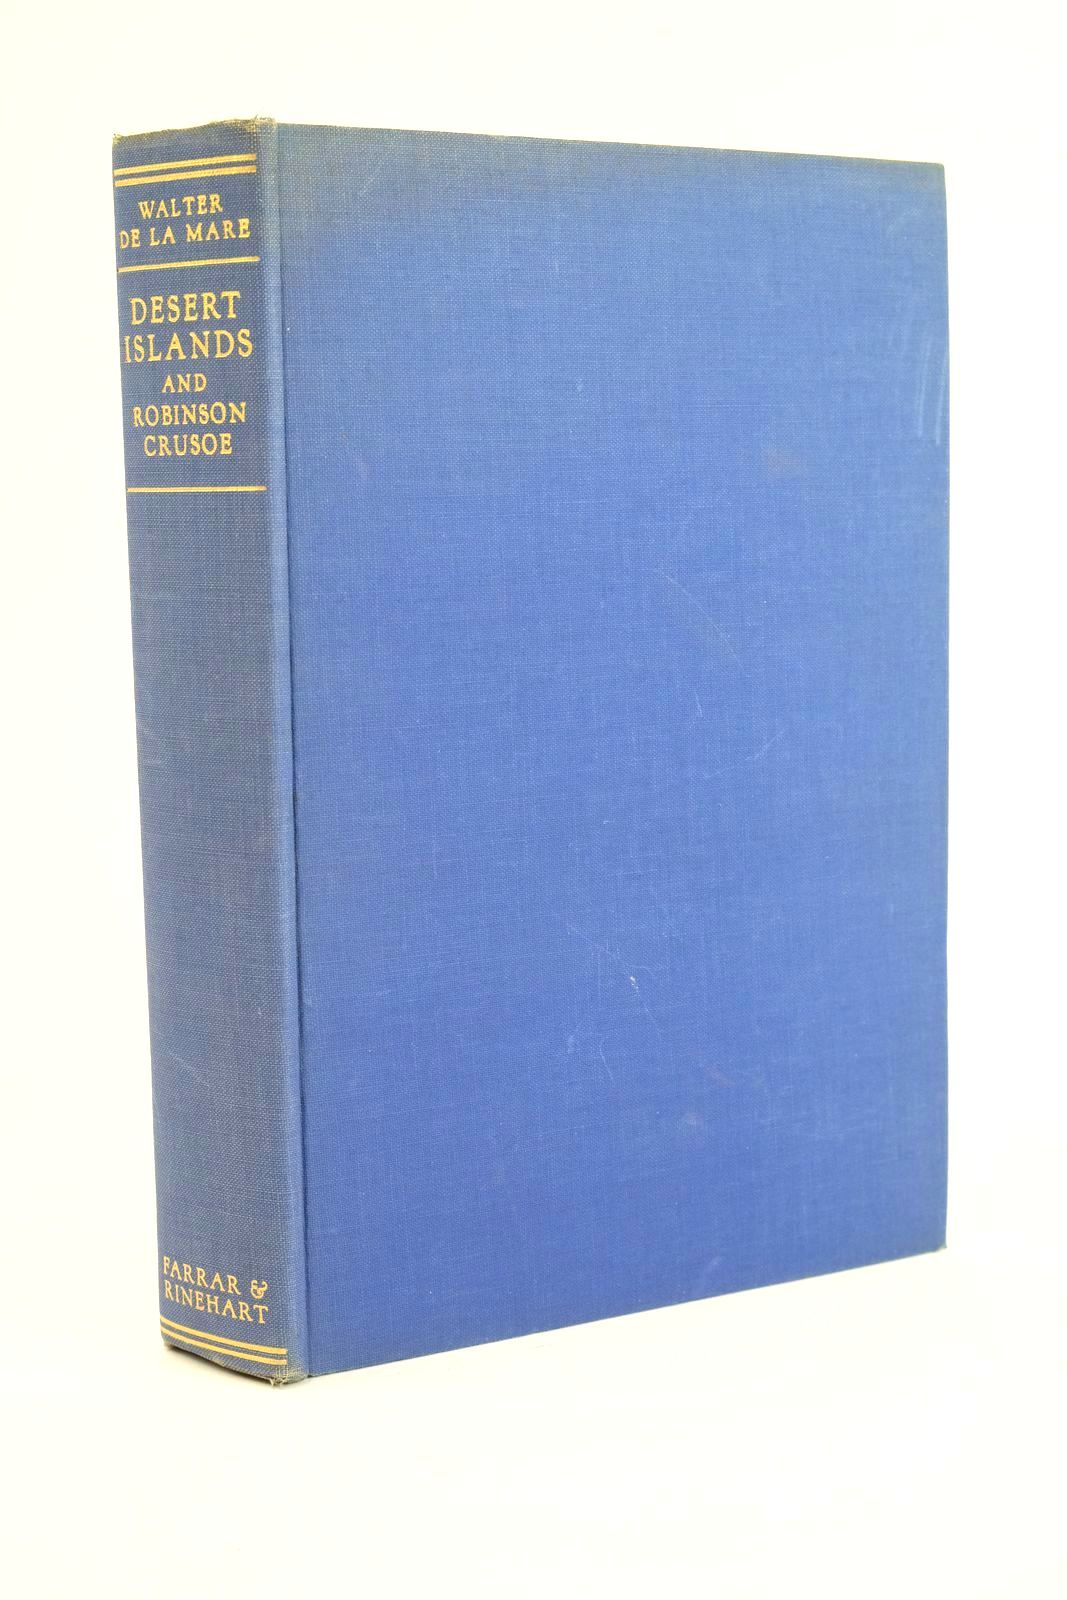 Photo of DESERT ISLANDS AND ROBINSON CRUSOE written by De La Mare, Walter illustrated by Whistler, Rex published by Faber &amp; Rinehart, Inc. (STOCK CODE: 1323476)  for sale by Stella & Rose's Books